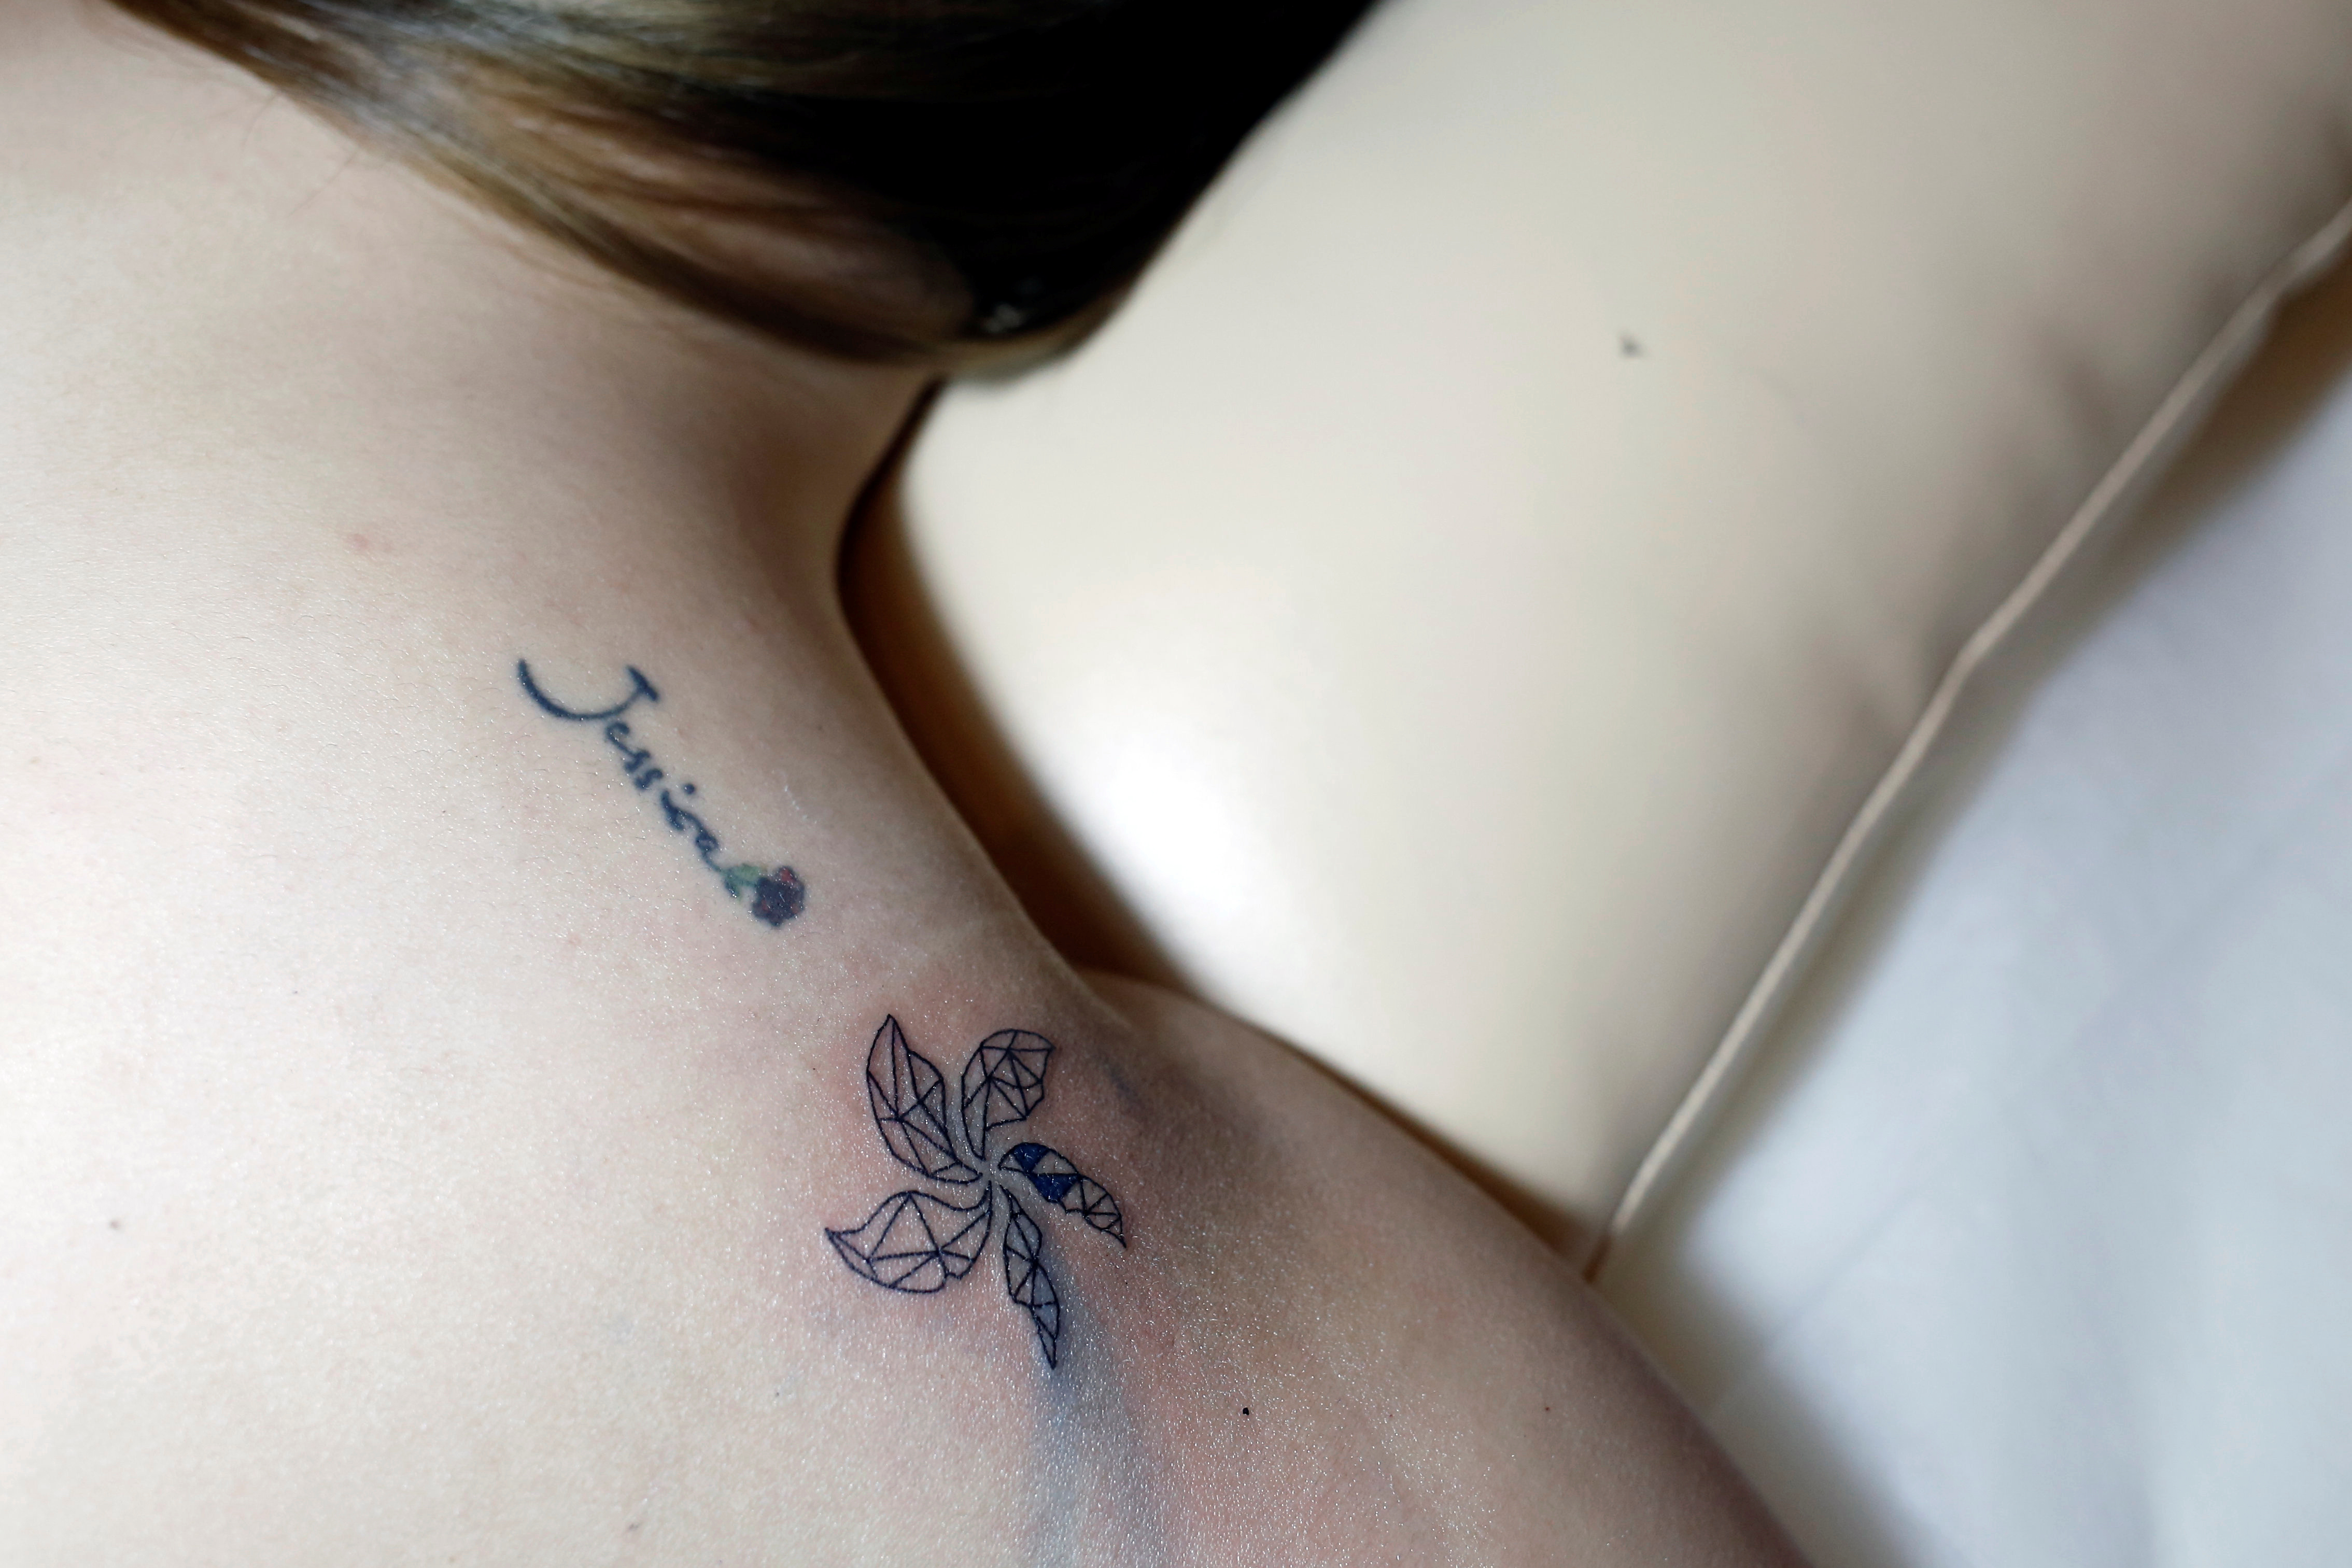 Meet My Ink: Tattoo Placement, Pain, and More! - The Blog — sophie・jb